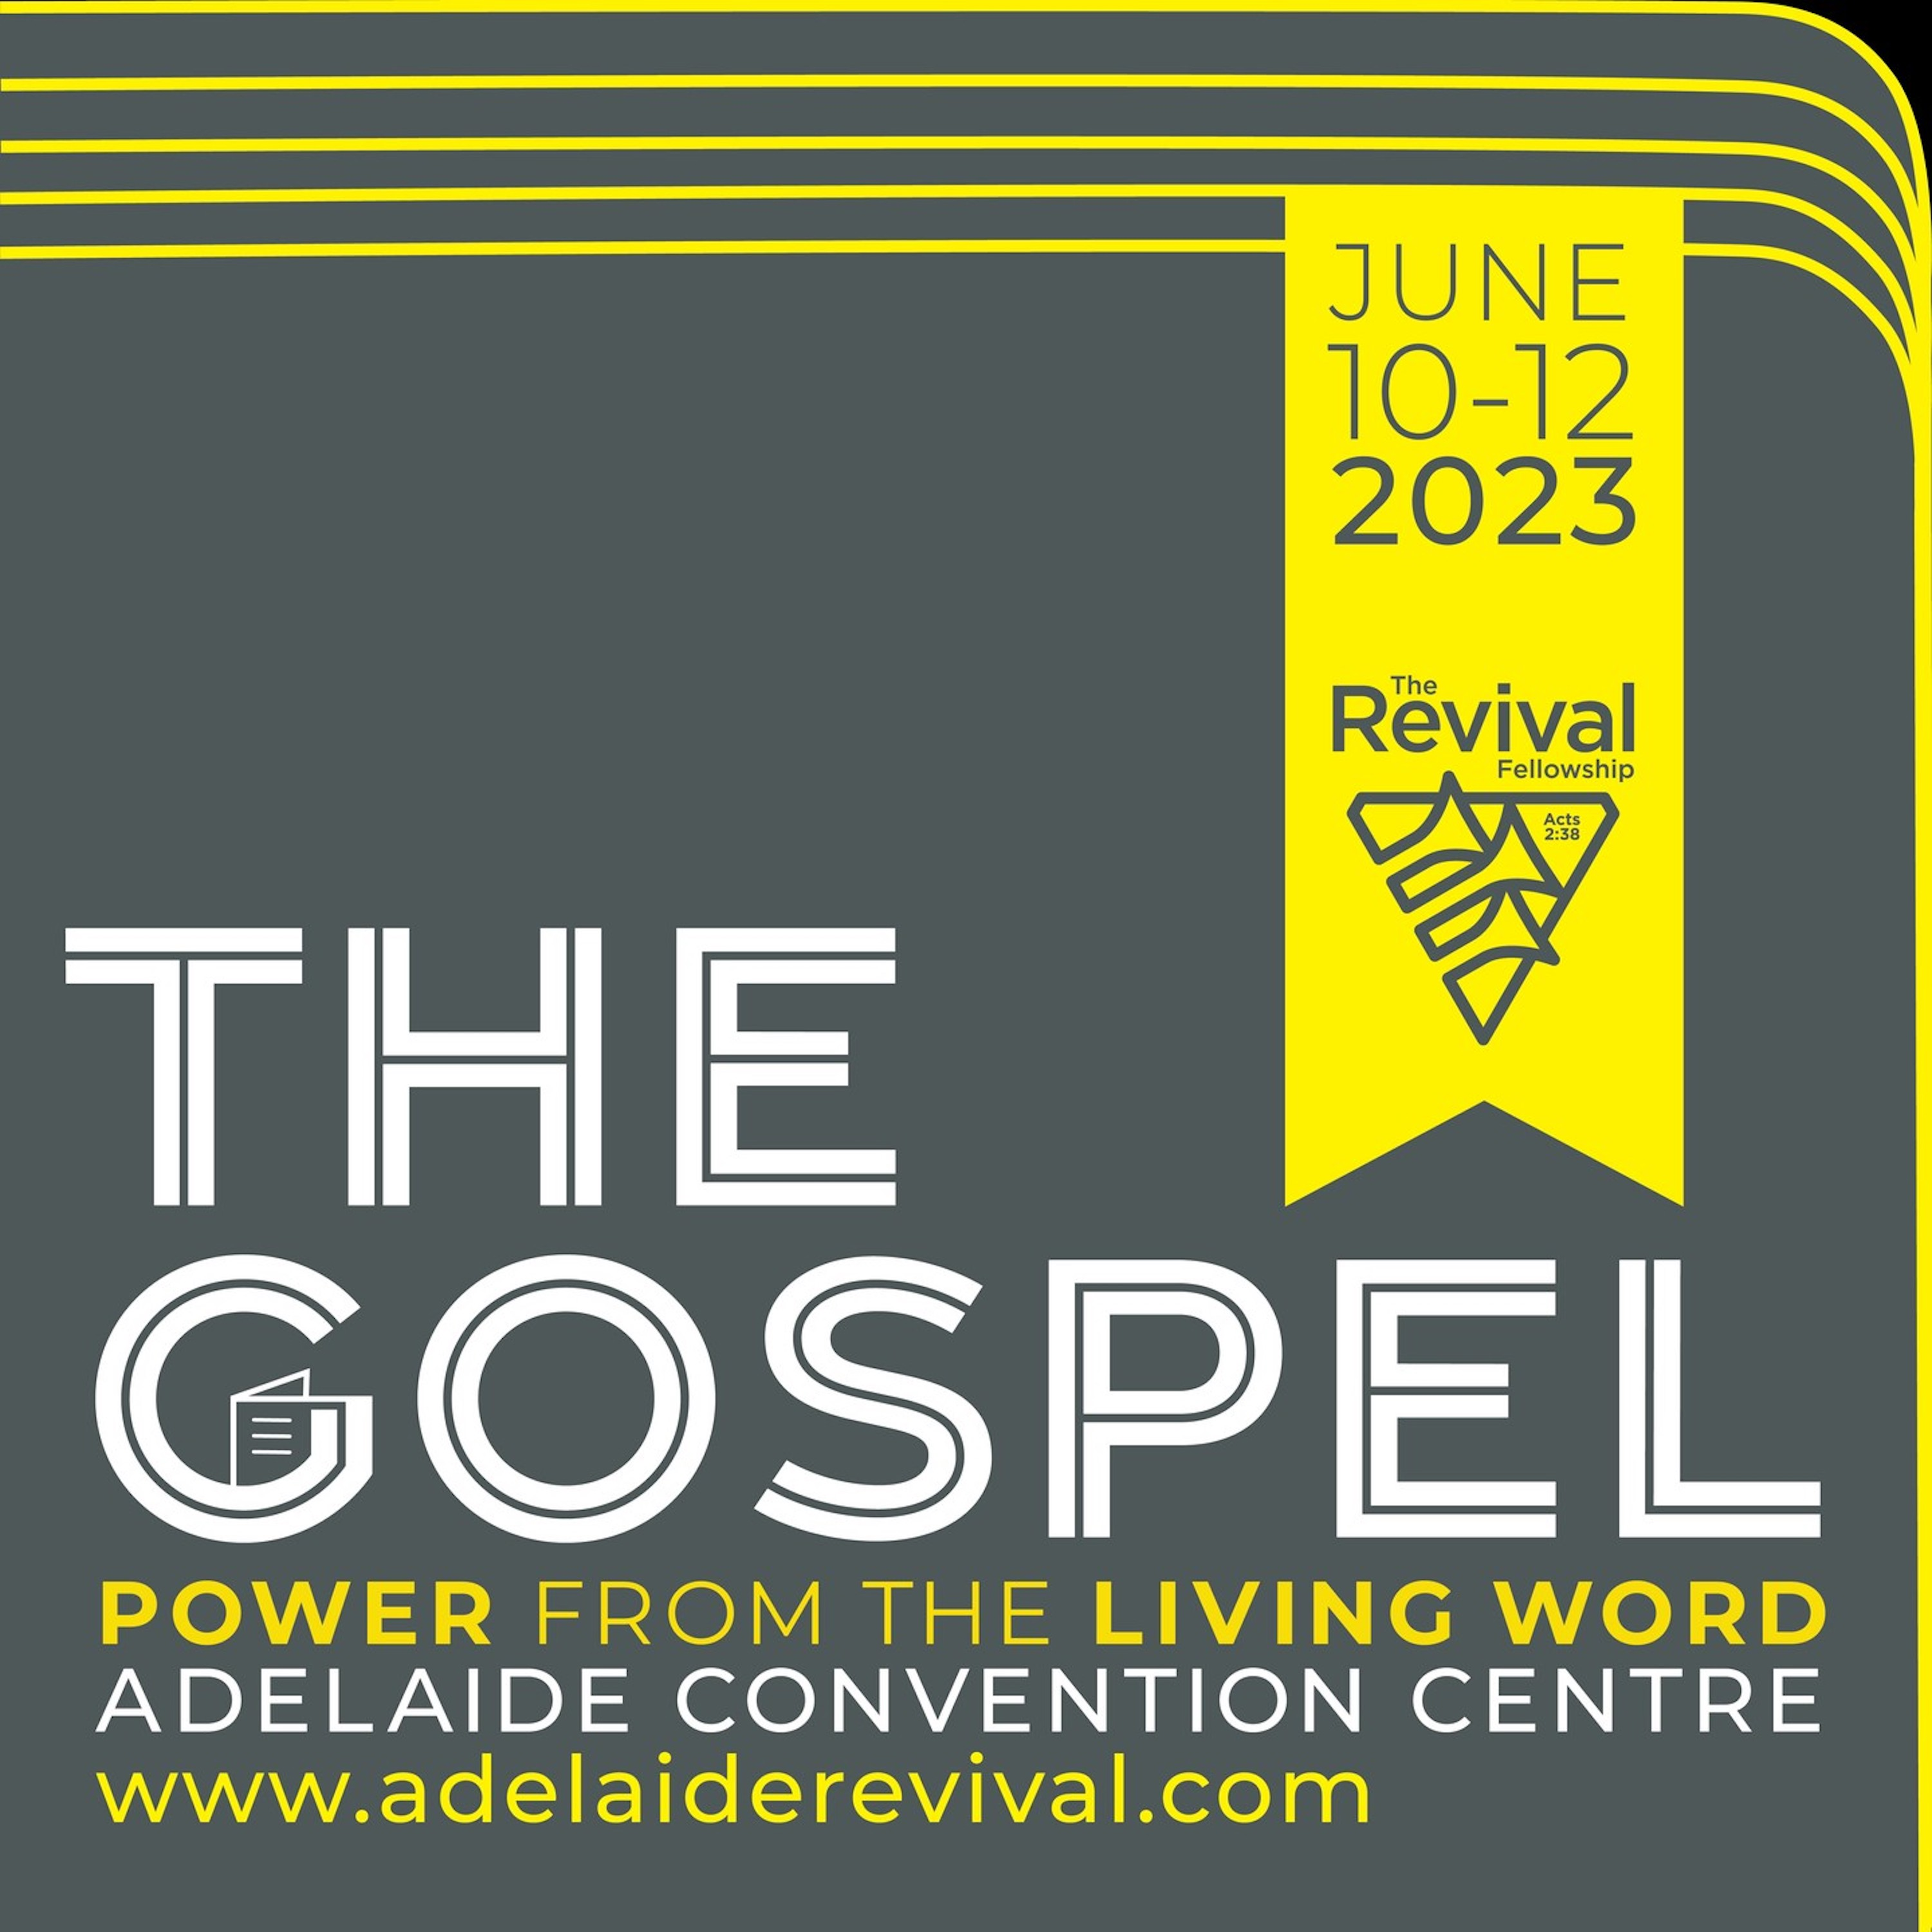 Convention 2023 - God is good - Pr Ian Jarvis